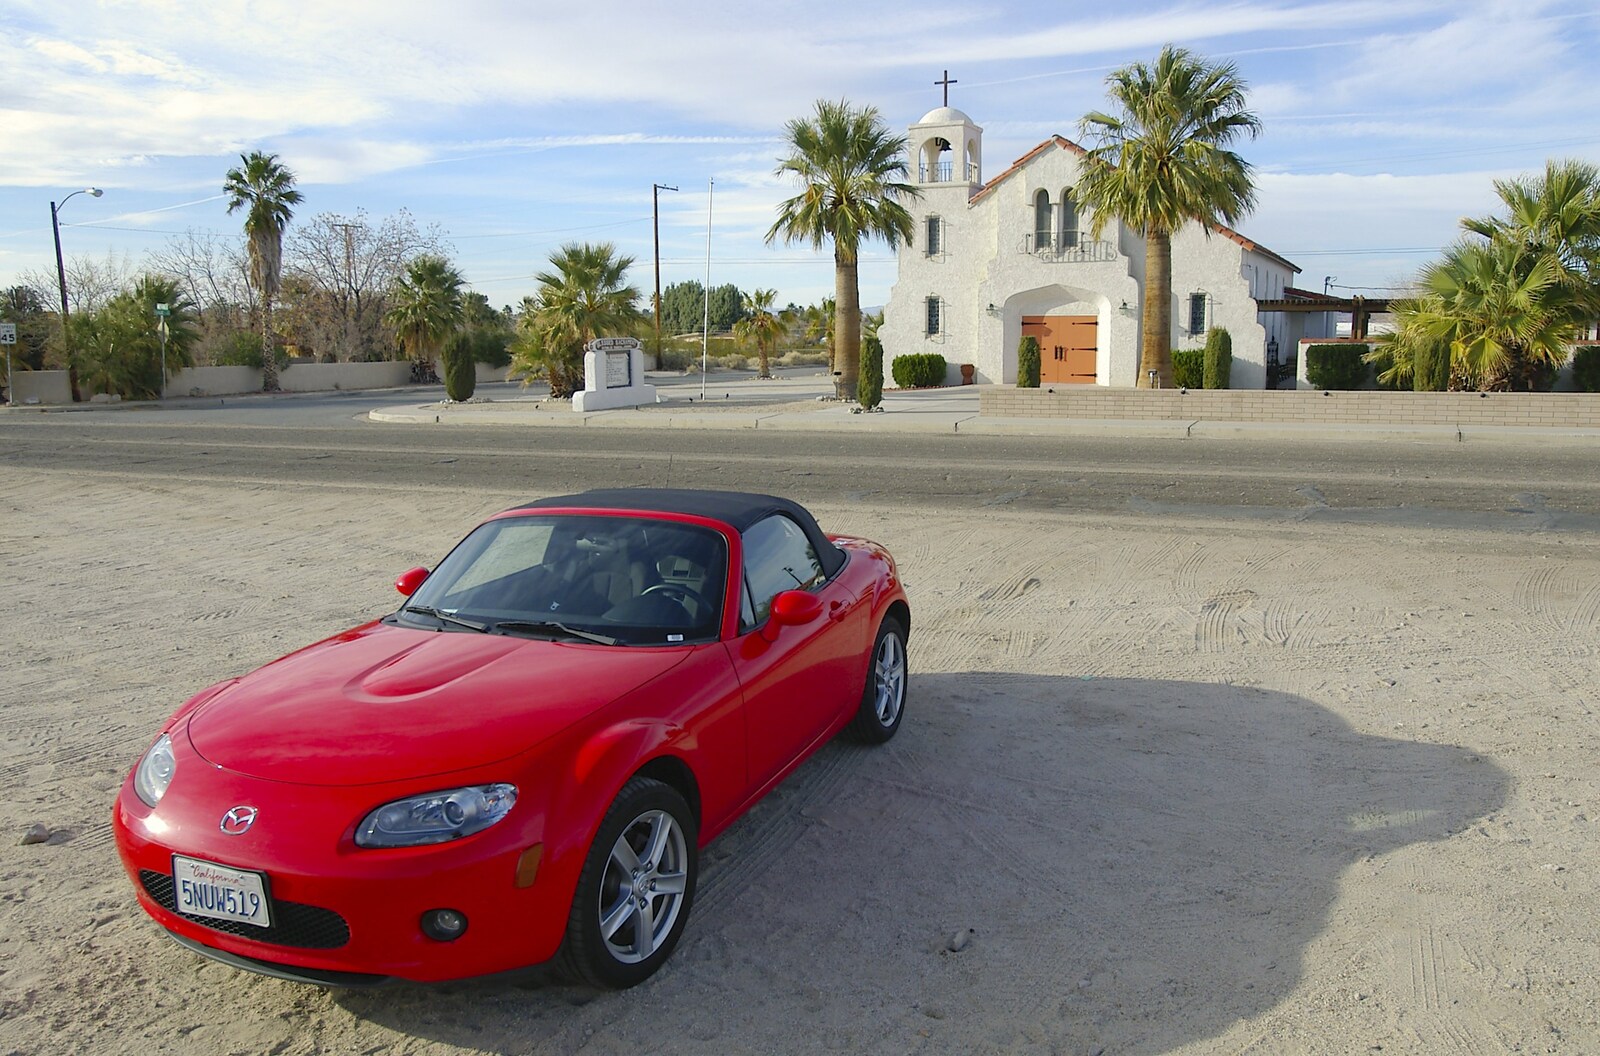 The MX-5 outside the Joshua Tree mission from Mojave Desert: San Diego to Joshua Tree and Twentynine Palms, California, US - 5th March 2006